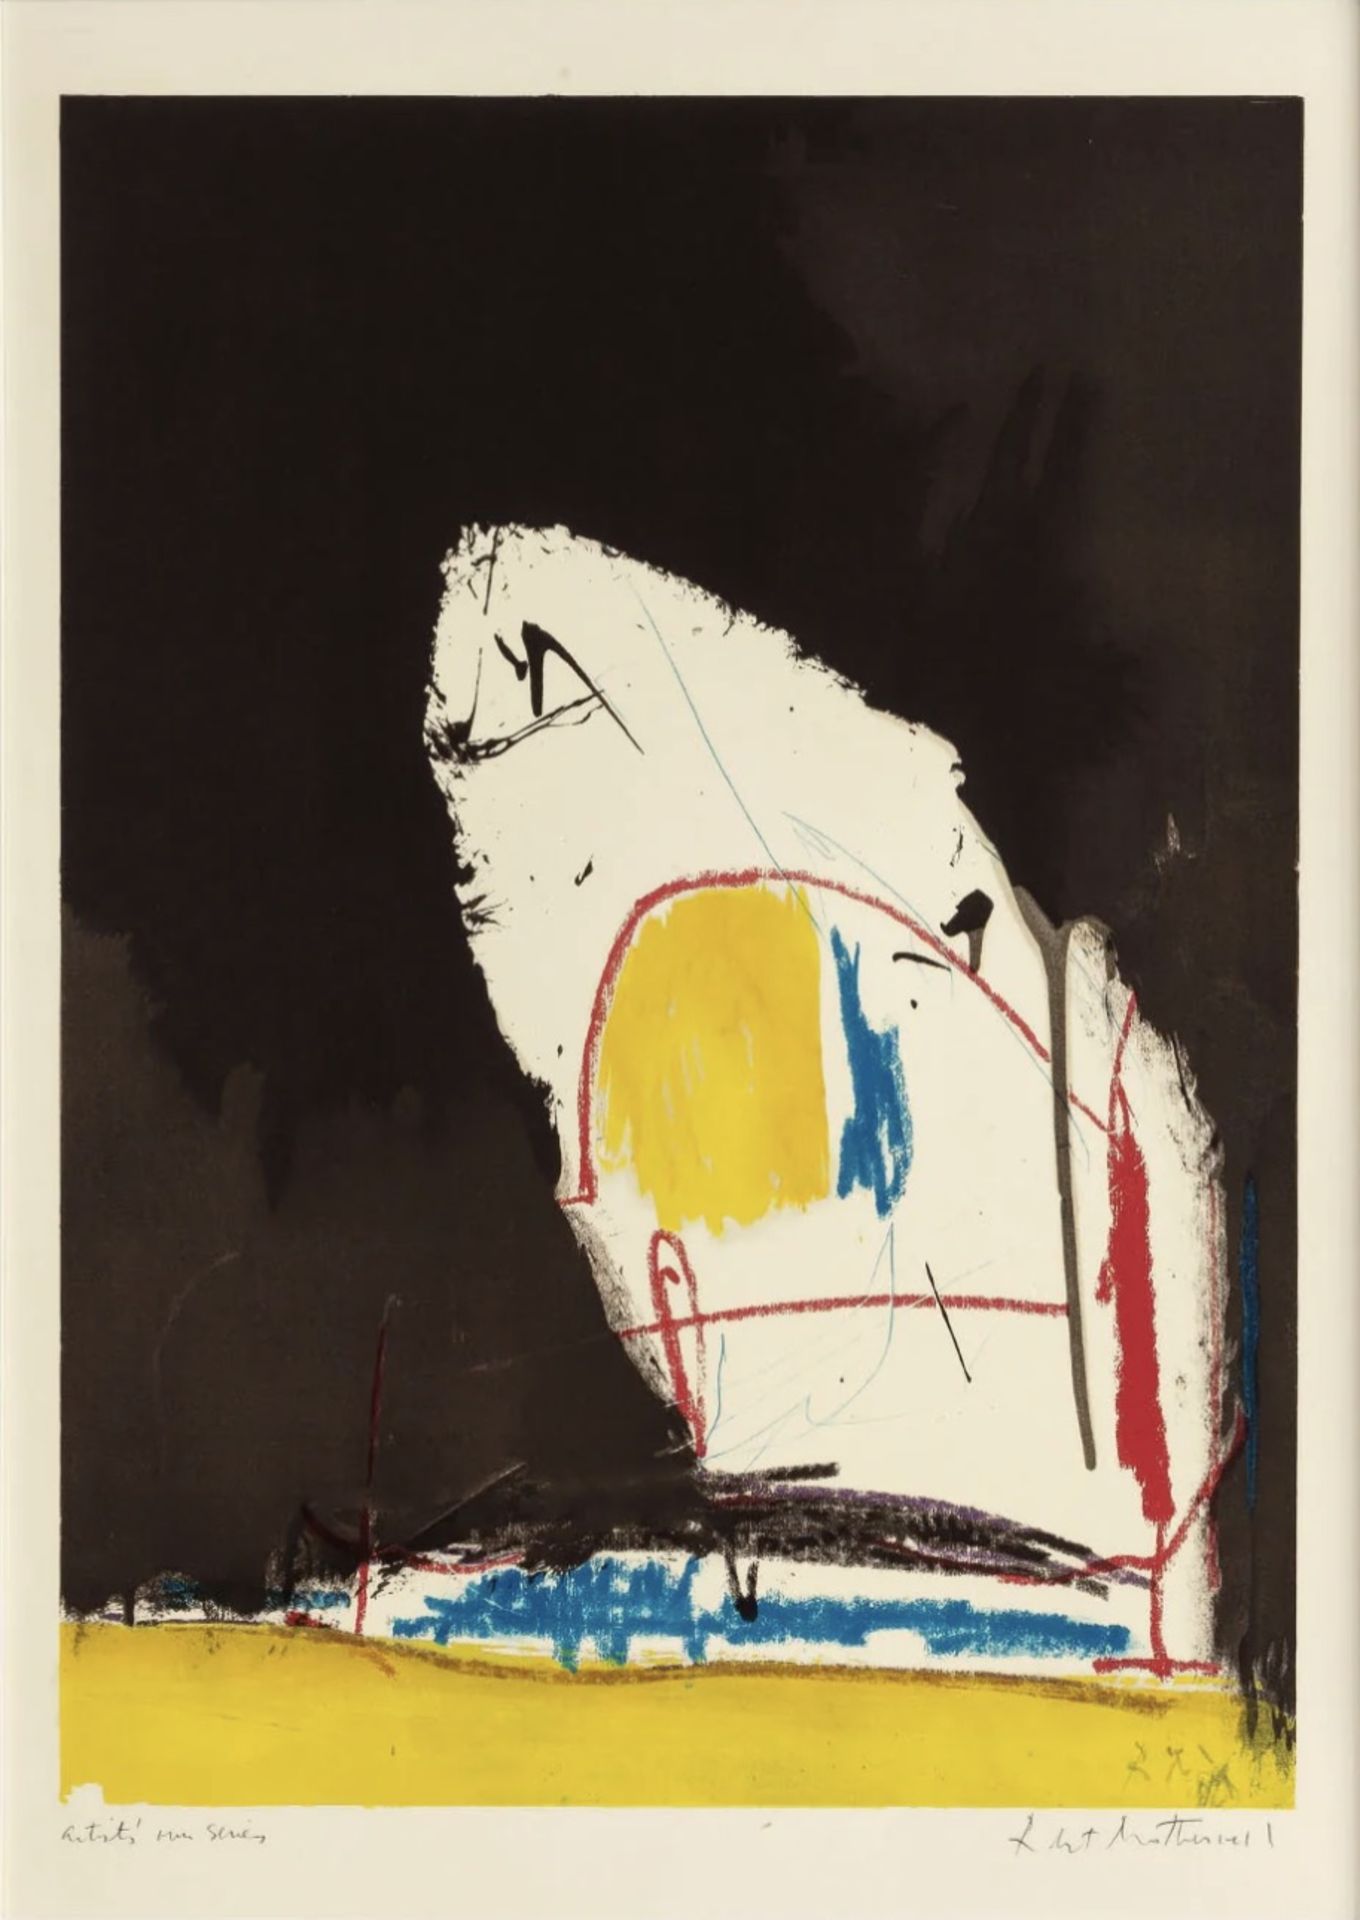 Robert Motherwell "Capriccio" Plate Signed Offset Lithograph